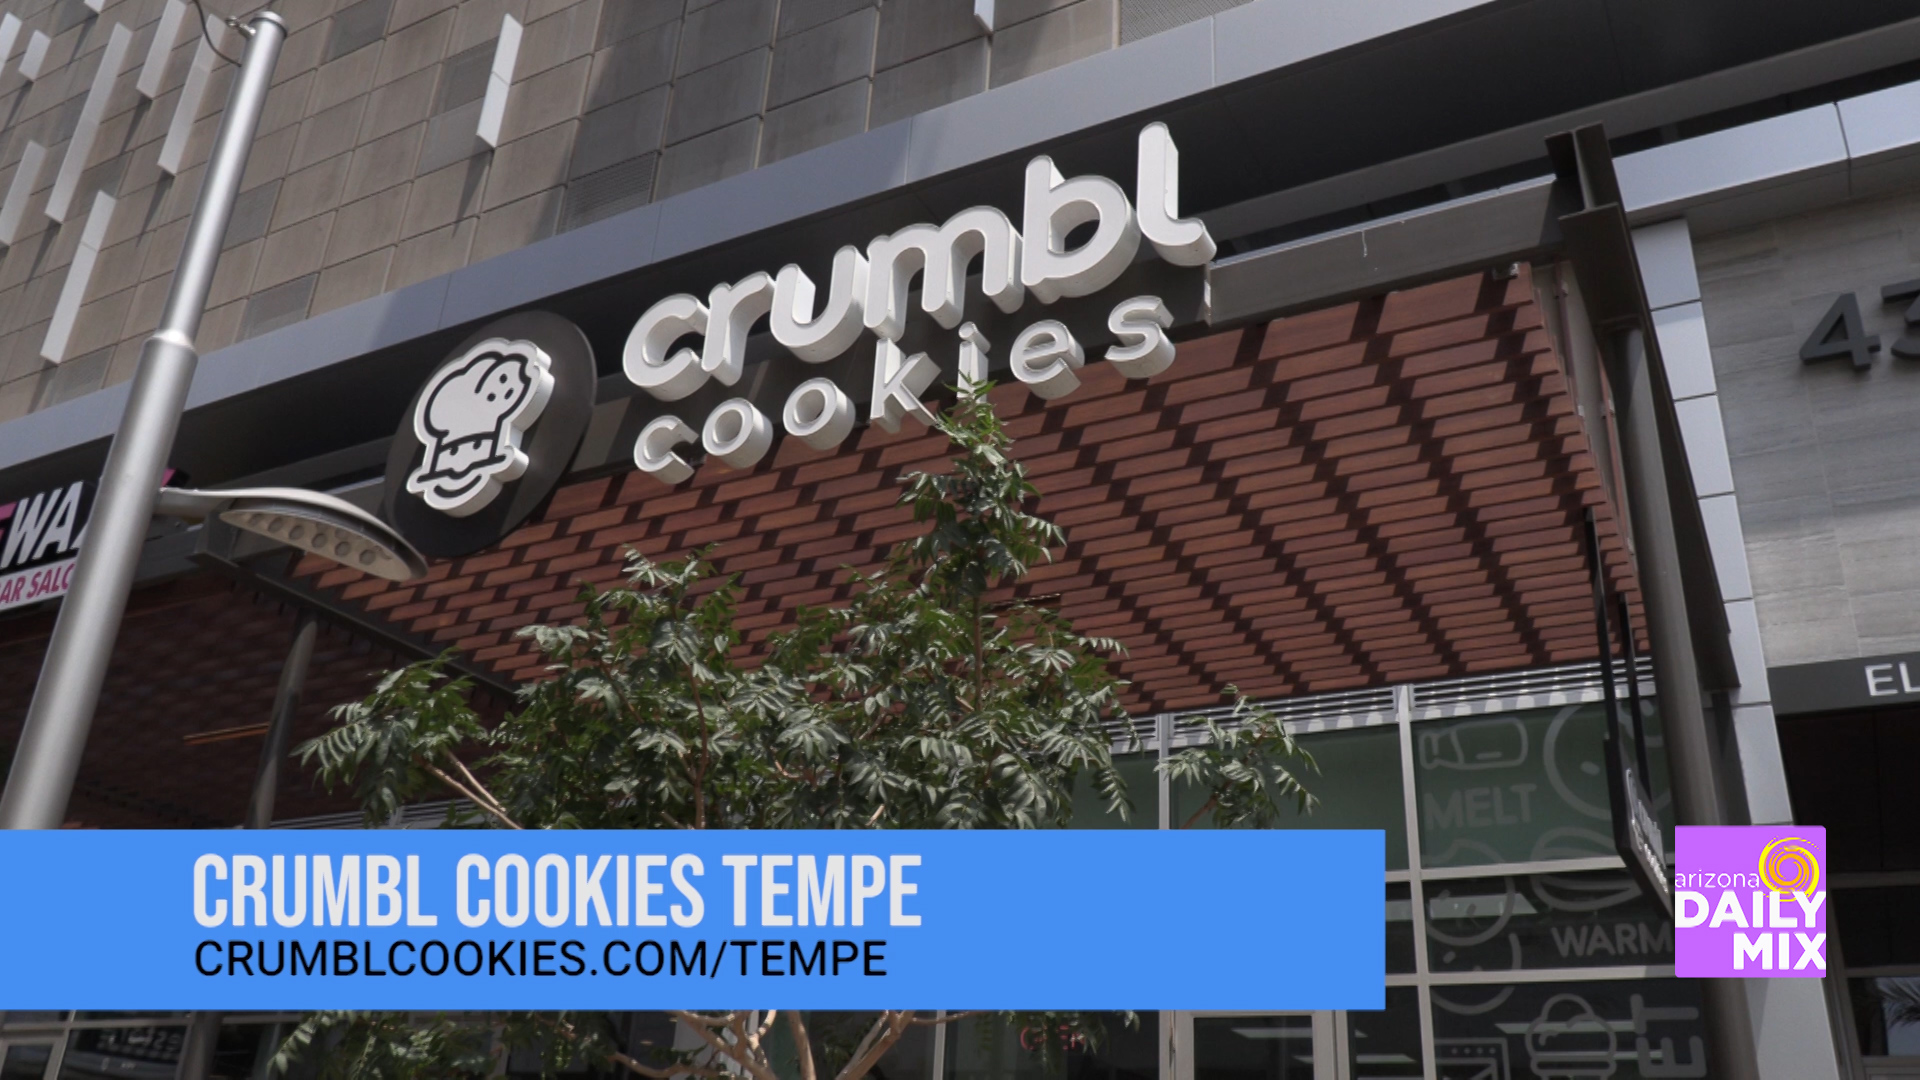 Crumbl Cookies Tempe is Stuffing the Bus